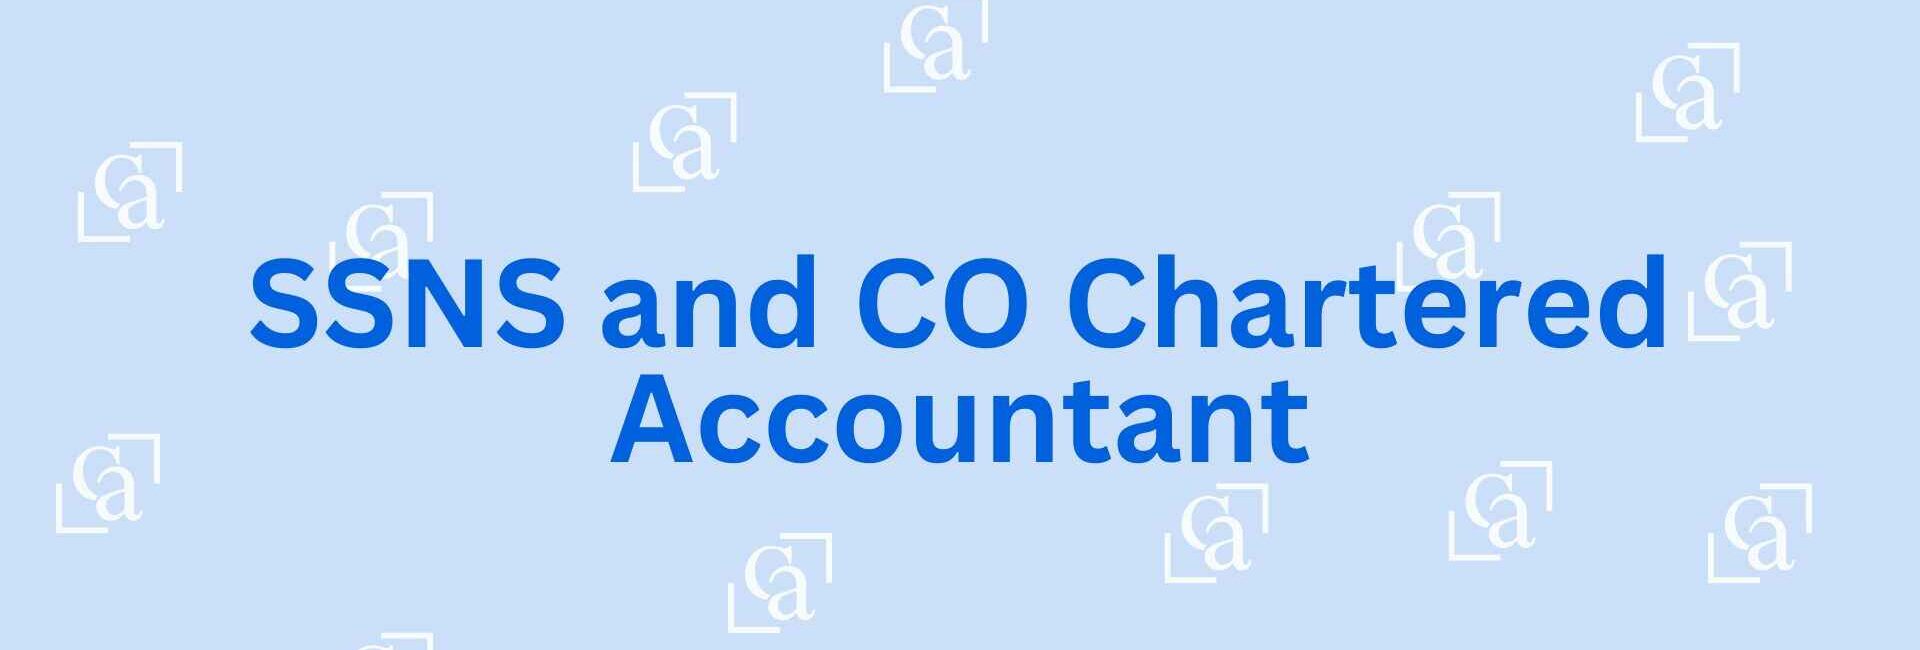 SSNS and CO Chartered Accountant - Best Chartered accountant Noida